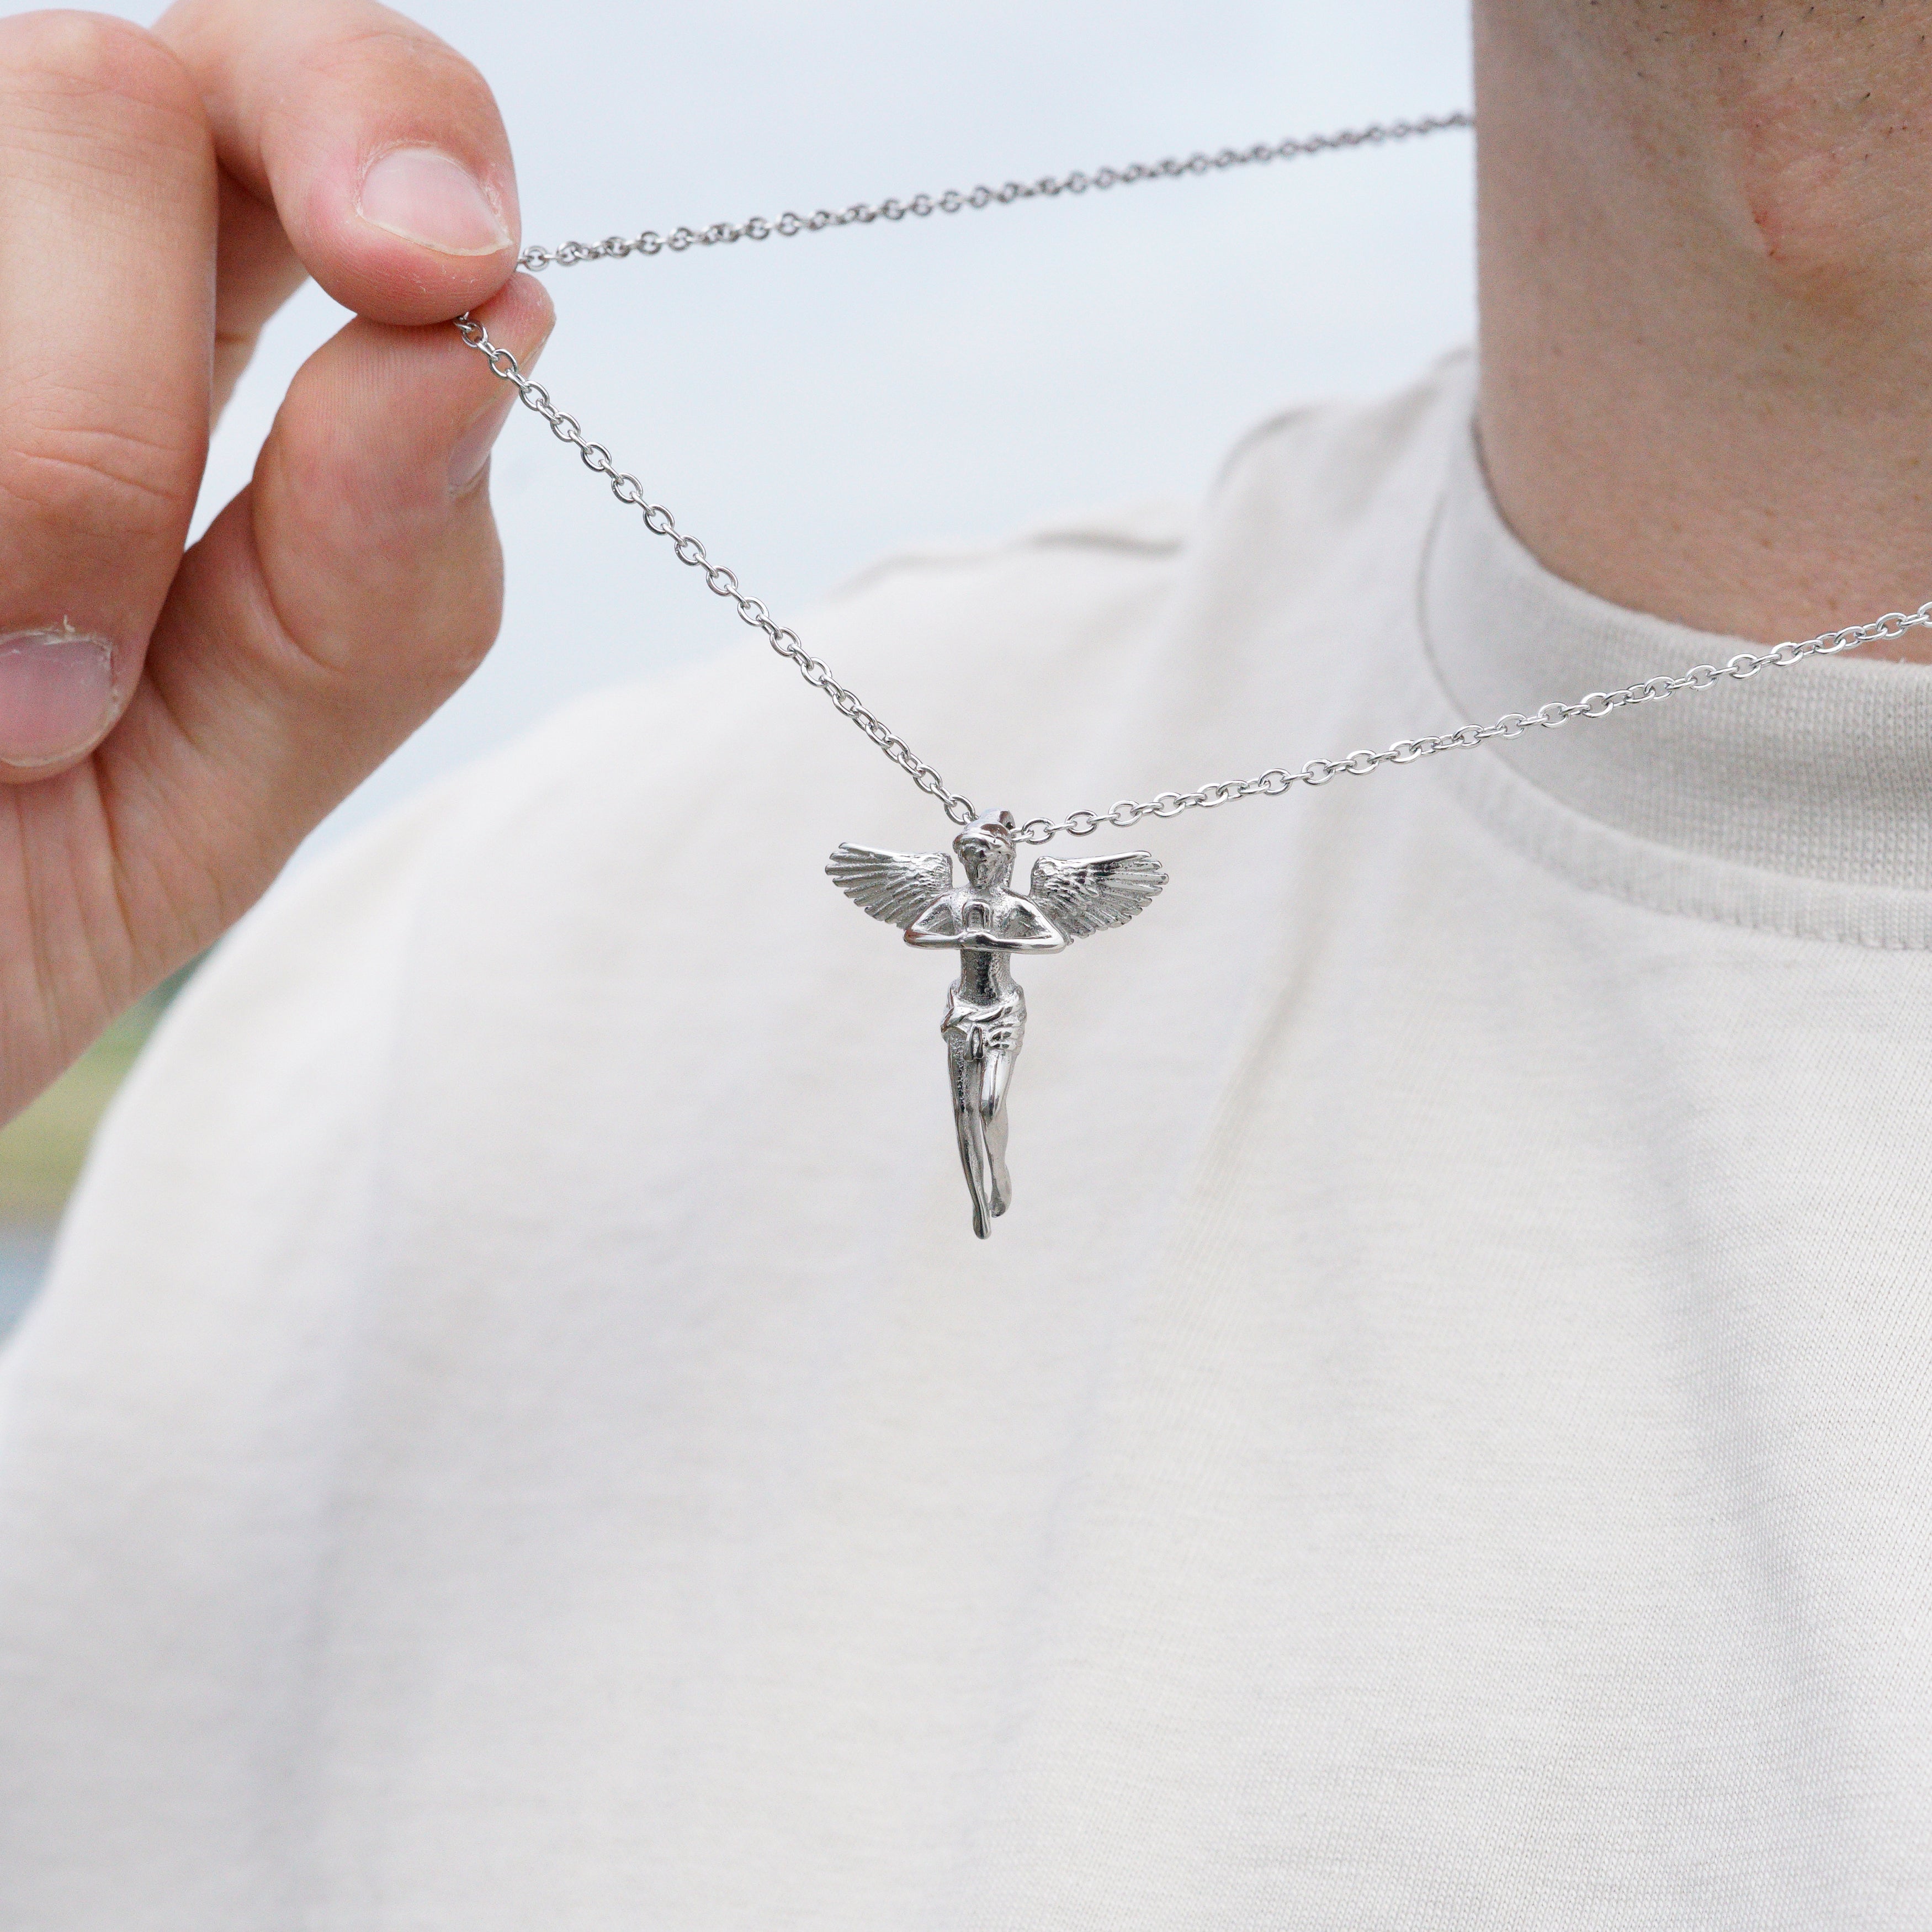 FLYING ANGEL NECKLACE - SILVER TONE